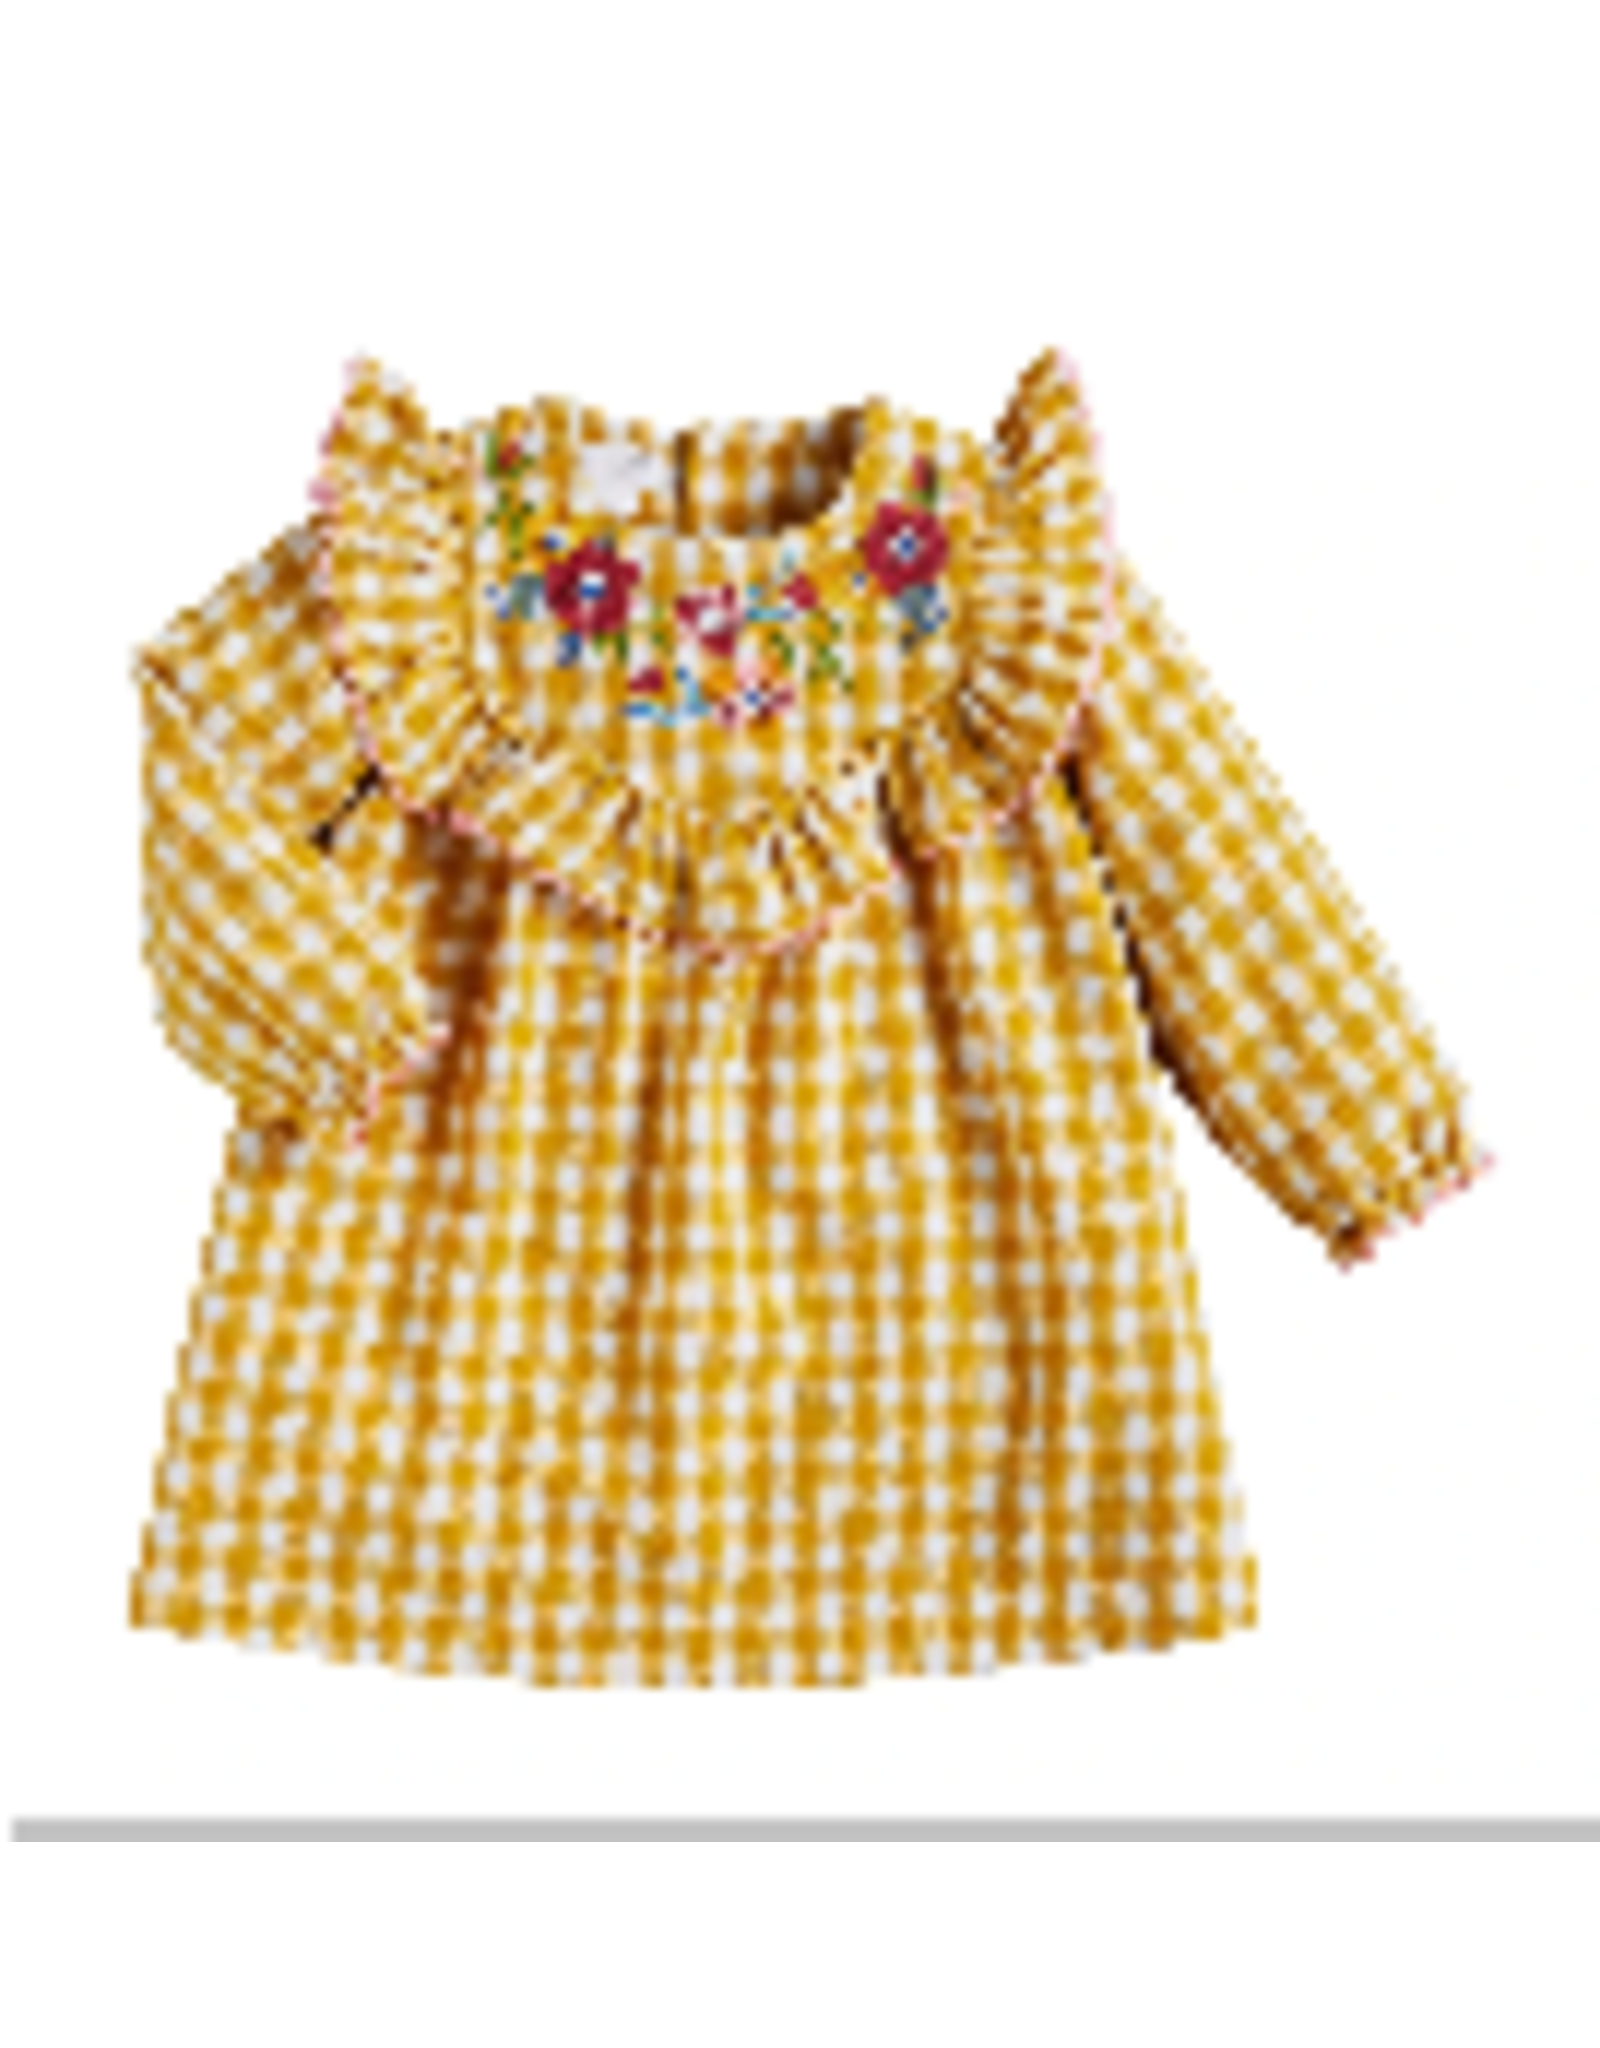 Mudpie Gingham Embroidered Dress